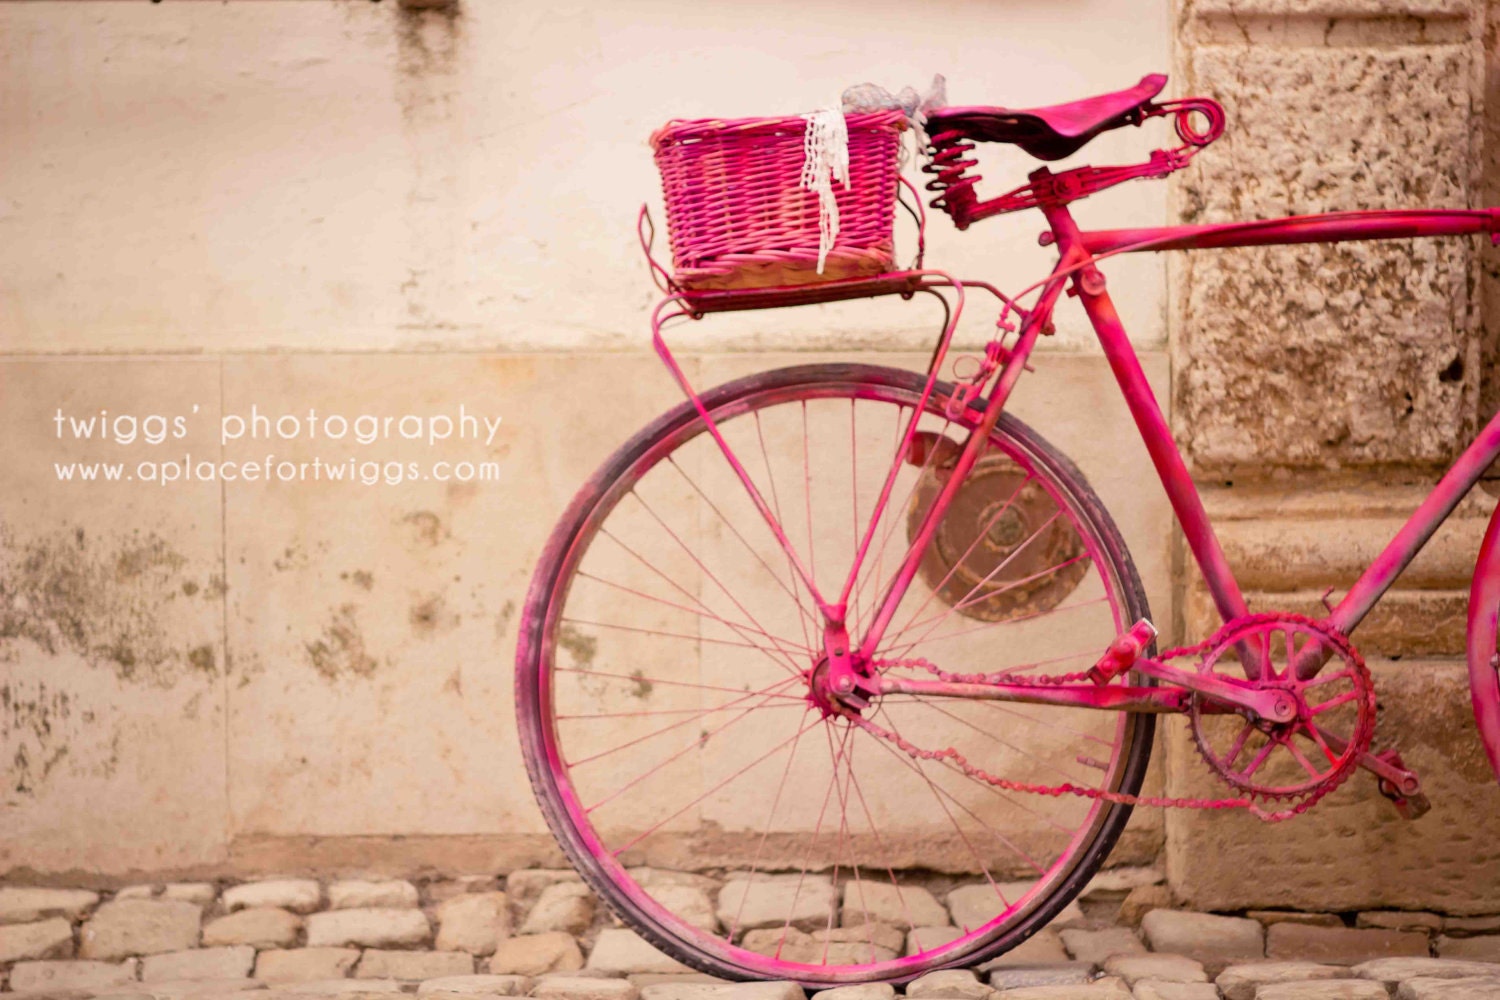 The Lady in Pink 8x12 Original Fine Art Photograph - vibrant pink vintage bike romantic whimsical